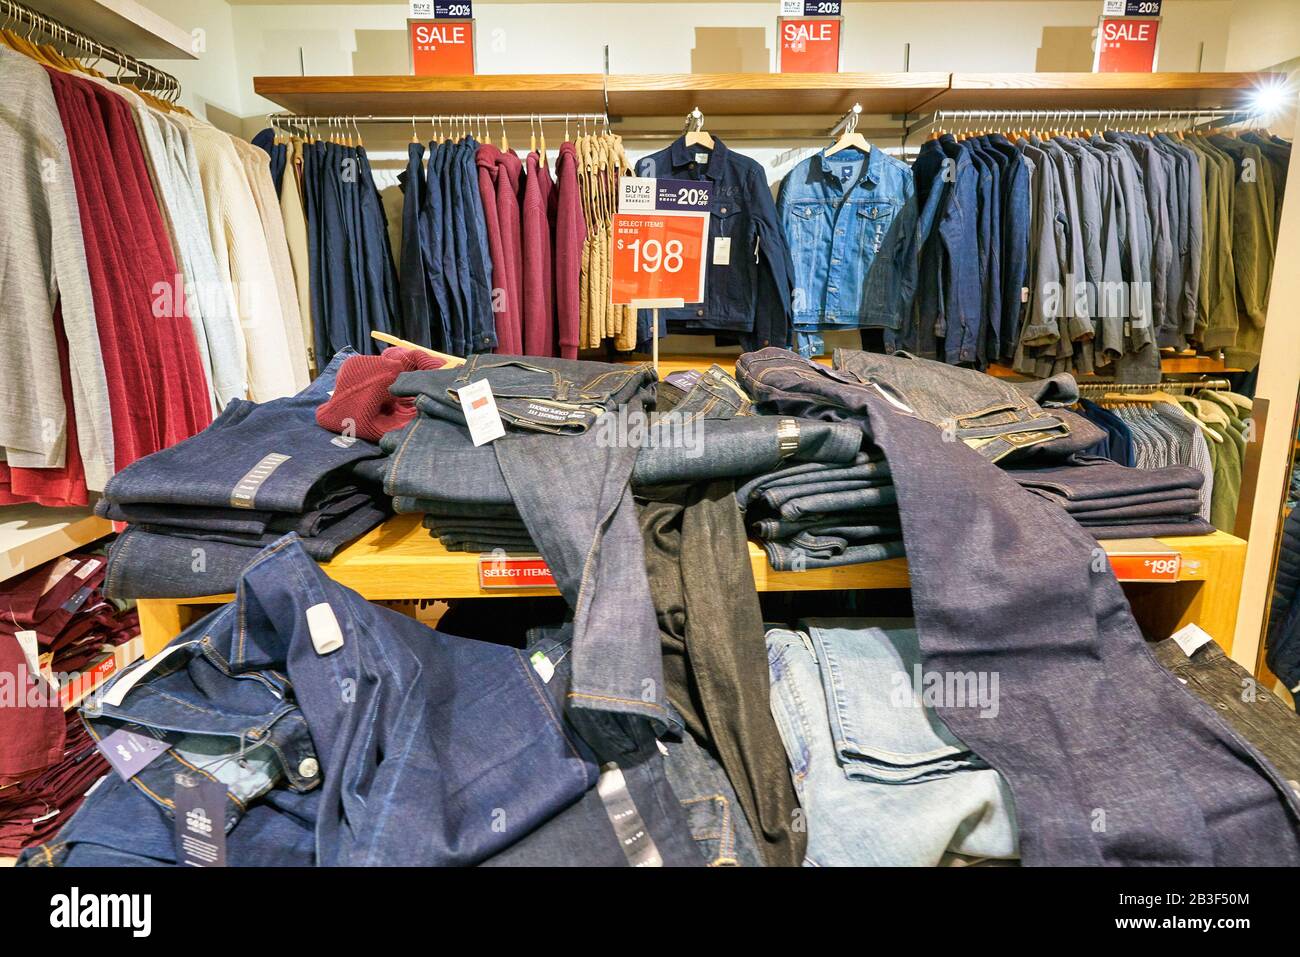 Page 3 - Gap Clothes Shop Store In High Resolution Stock Photography and  Images - Alamy